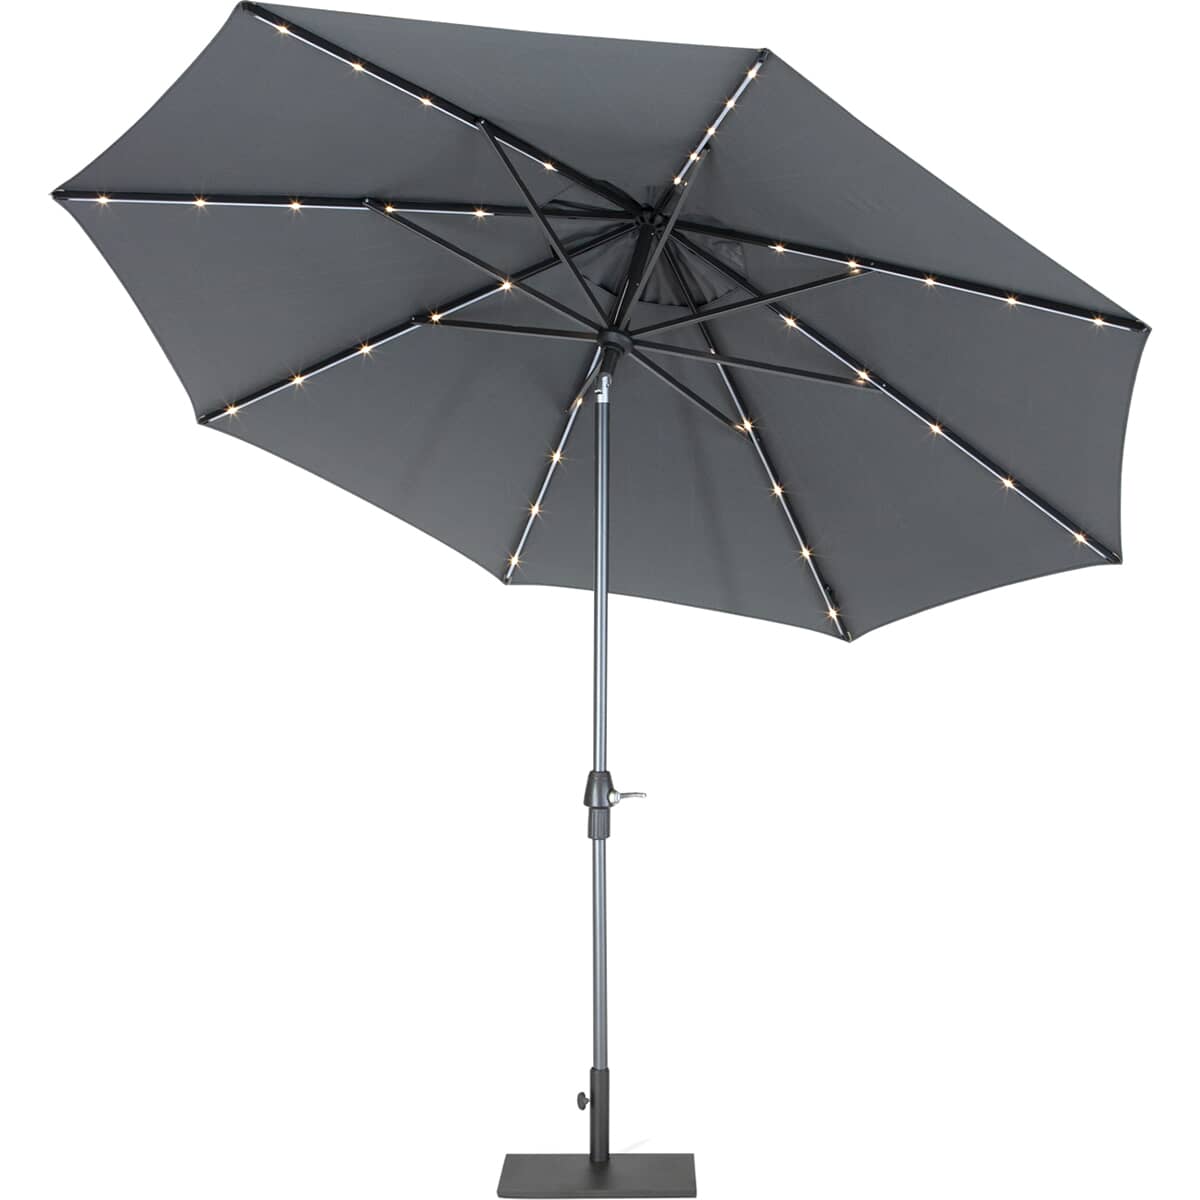 Kettler 3.0m Wind Up Parasol with Auto Tilt LED Solar - Grey Frame/Taupe Canopy